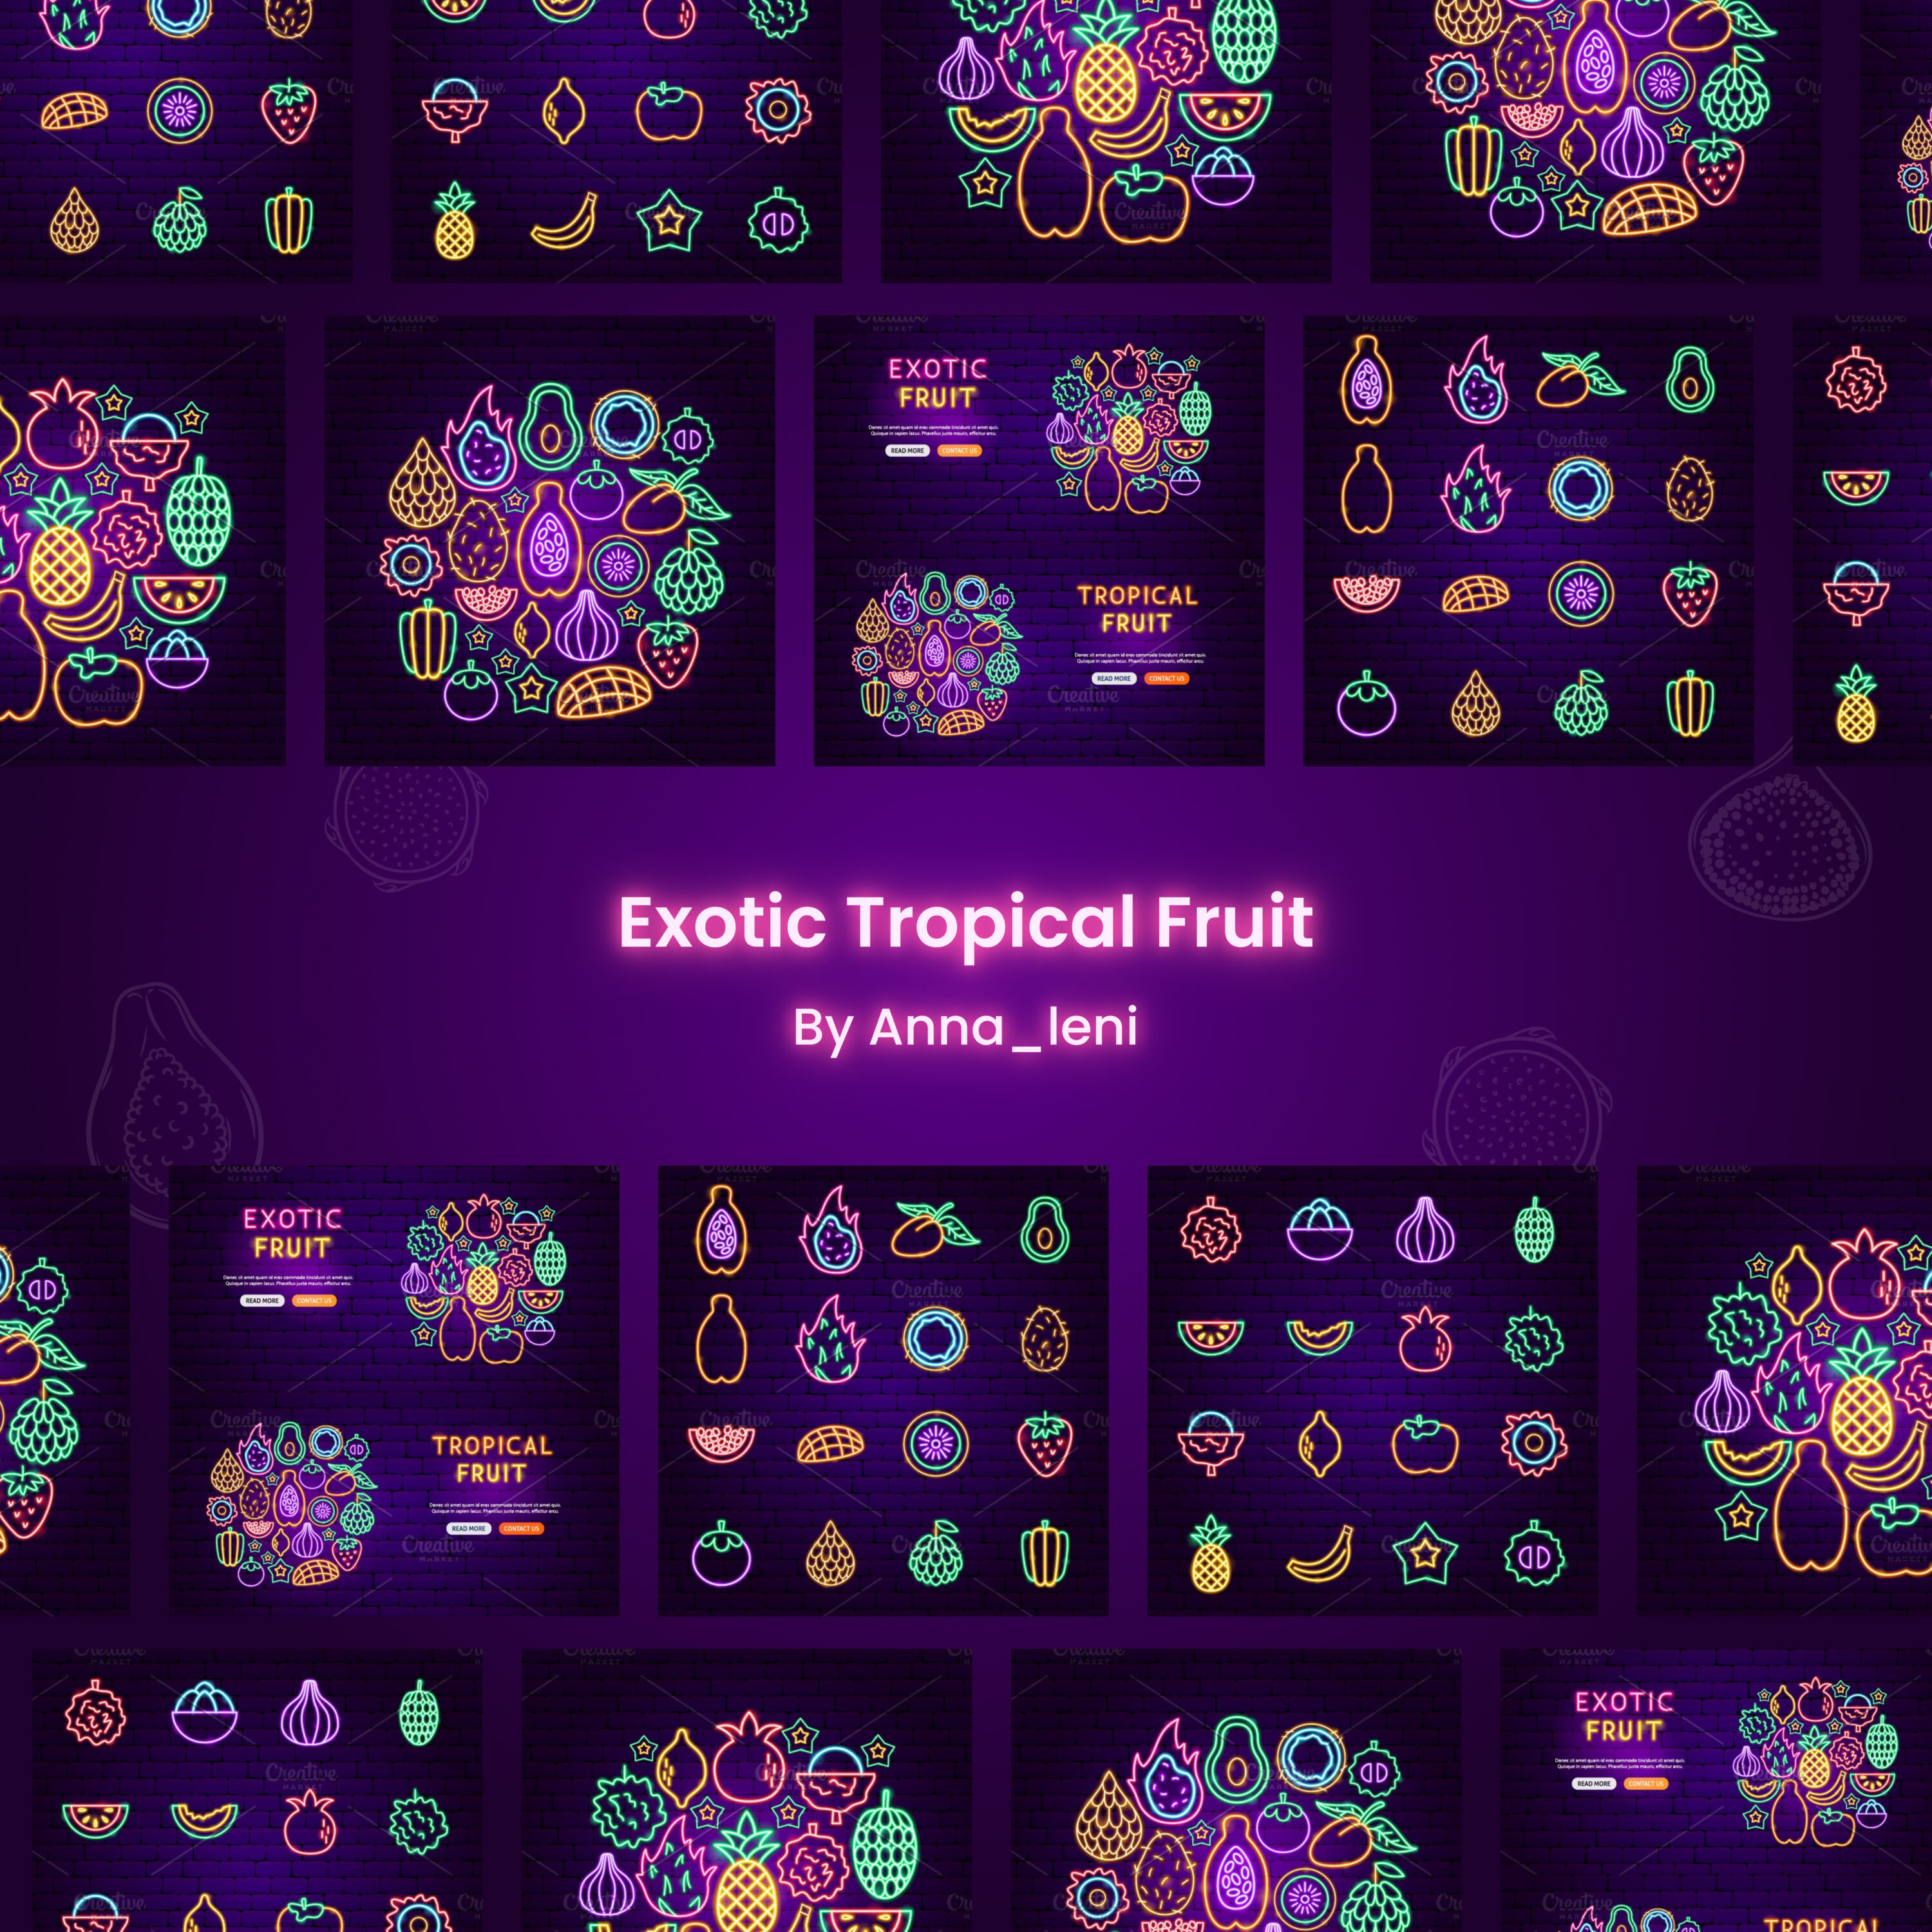 Exotic tropical fruit preview.